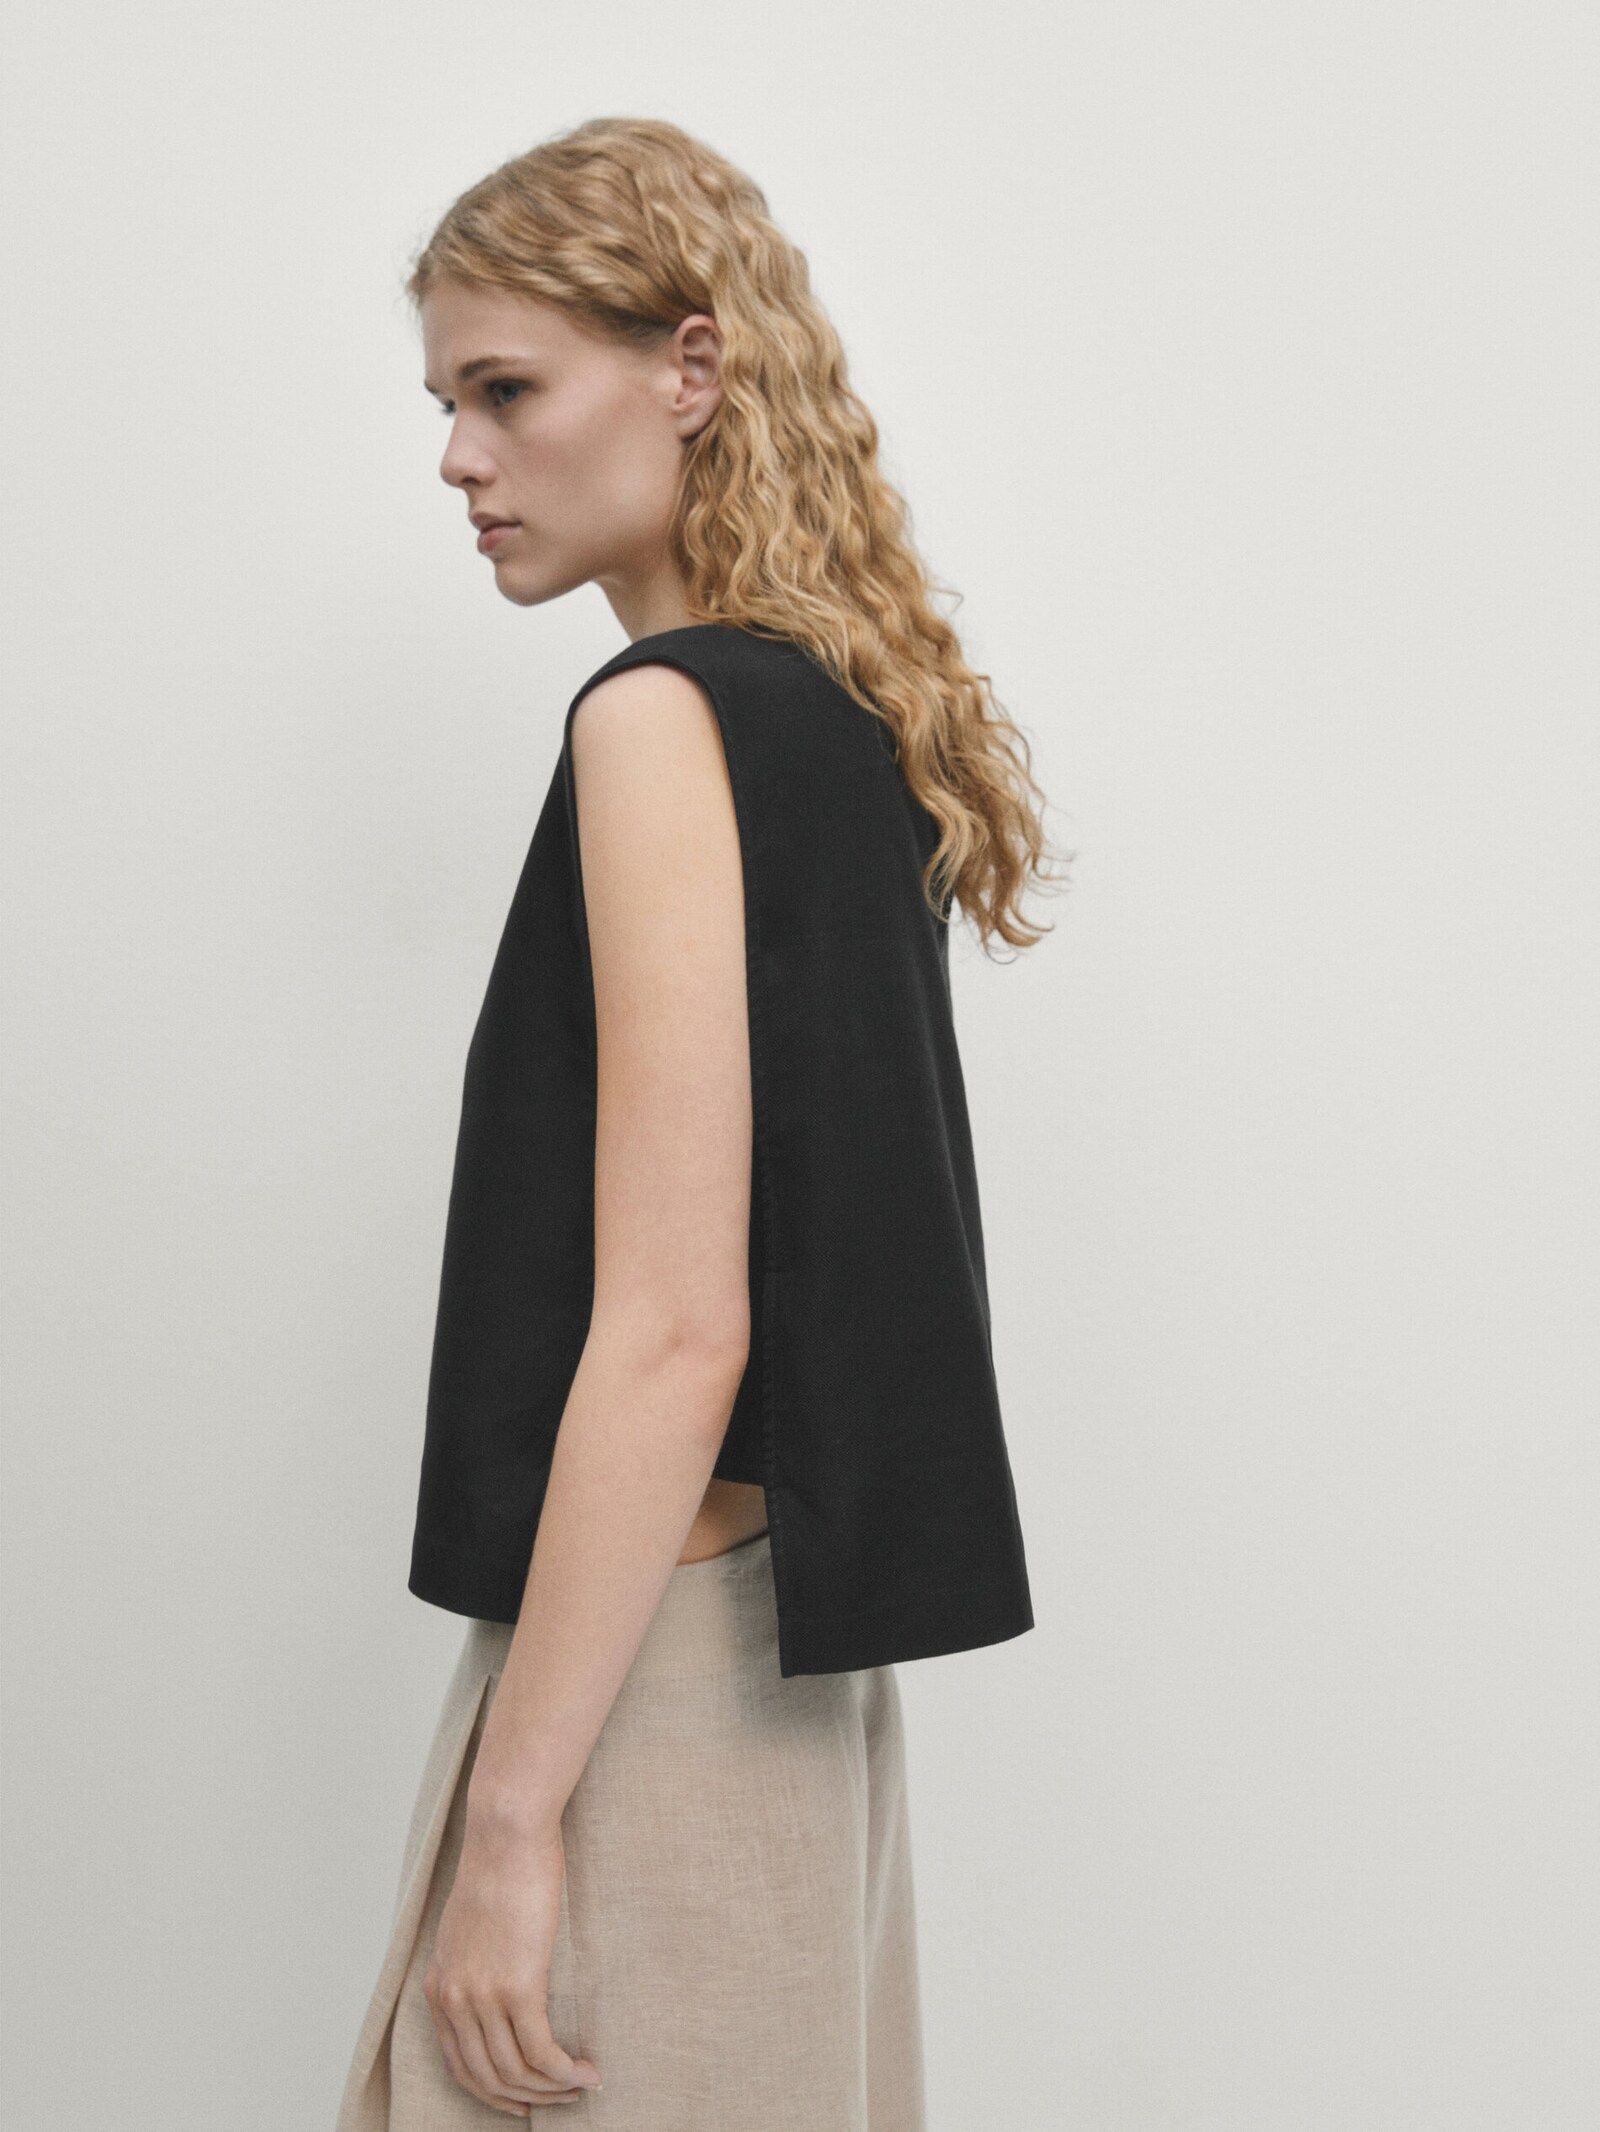 100% linen top with side detail | Massimo Dutti UK